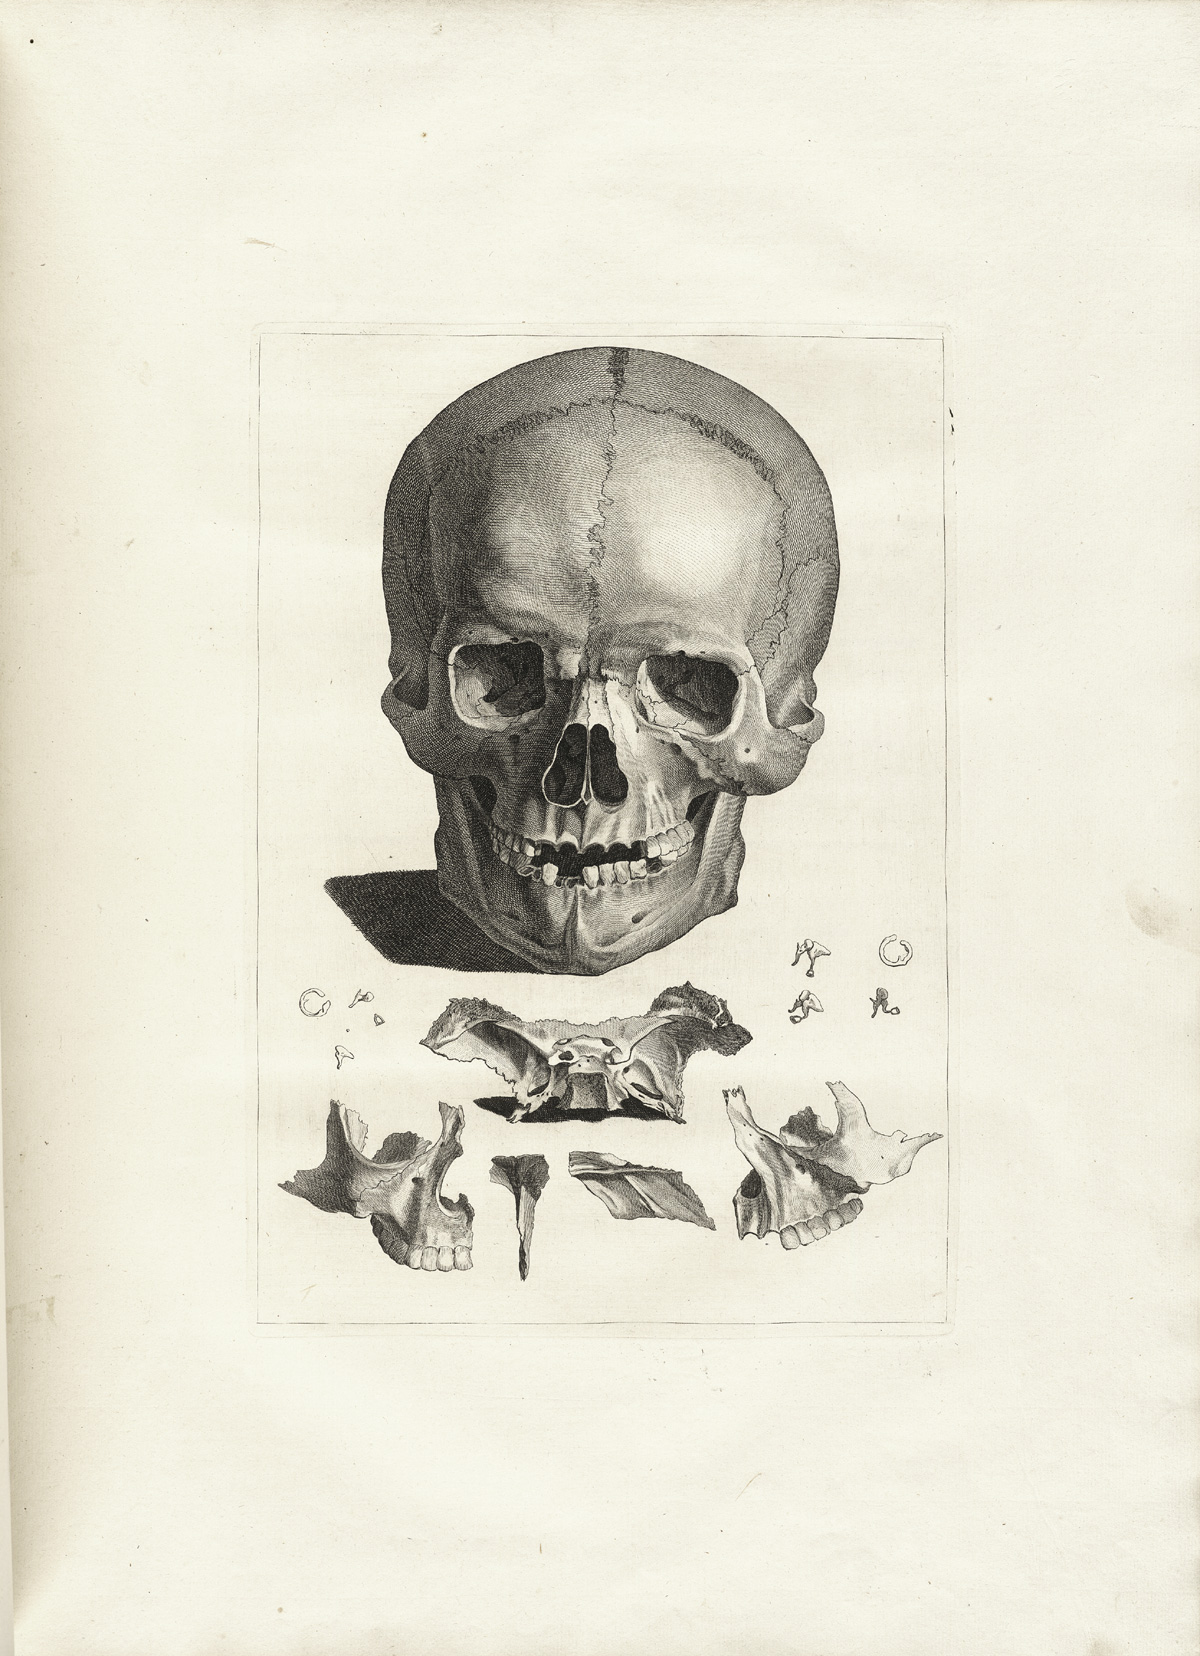 Engraving of a skull viewed from the front in the upper three quarters of the page with smaller bones scattered beneath, including the sphenoid bone viewed from behind in the middle, bones of the inner ear, and a view of the maxilla from inside and out, and the nasal bones; from Jacques Gamelin’s Nouveau recueil d’osteologie et de myologie, NLM Call no.: WZ 260 G178m 1779.